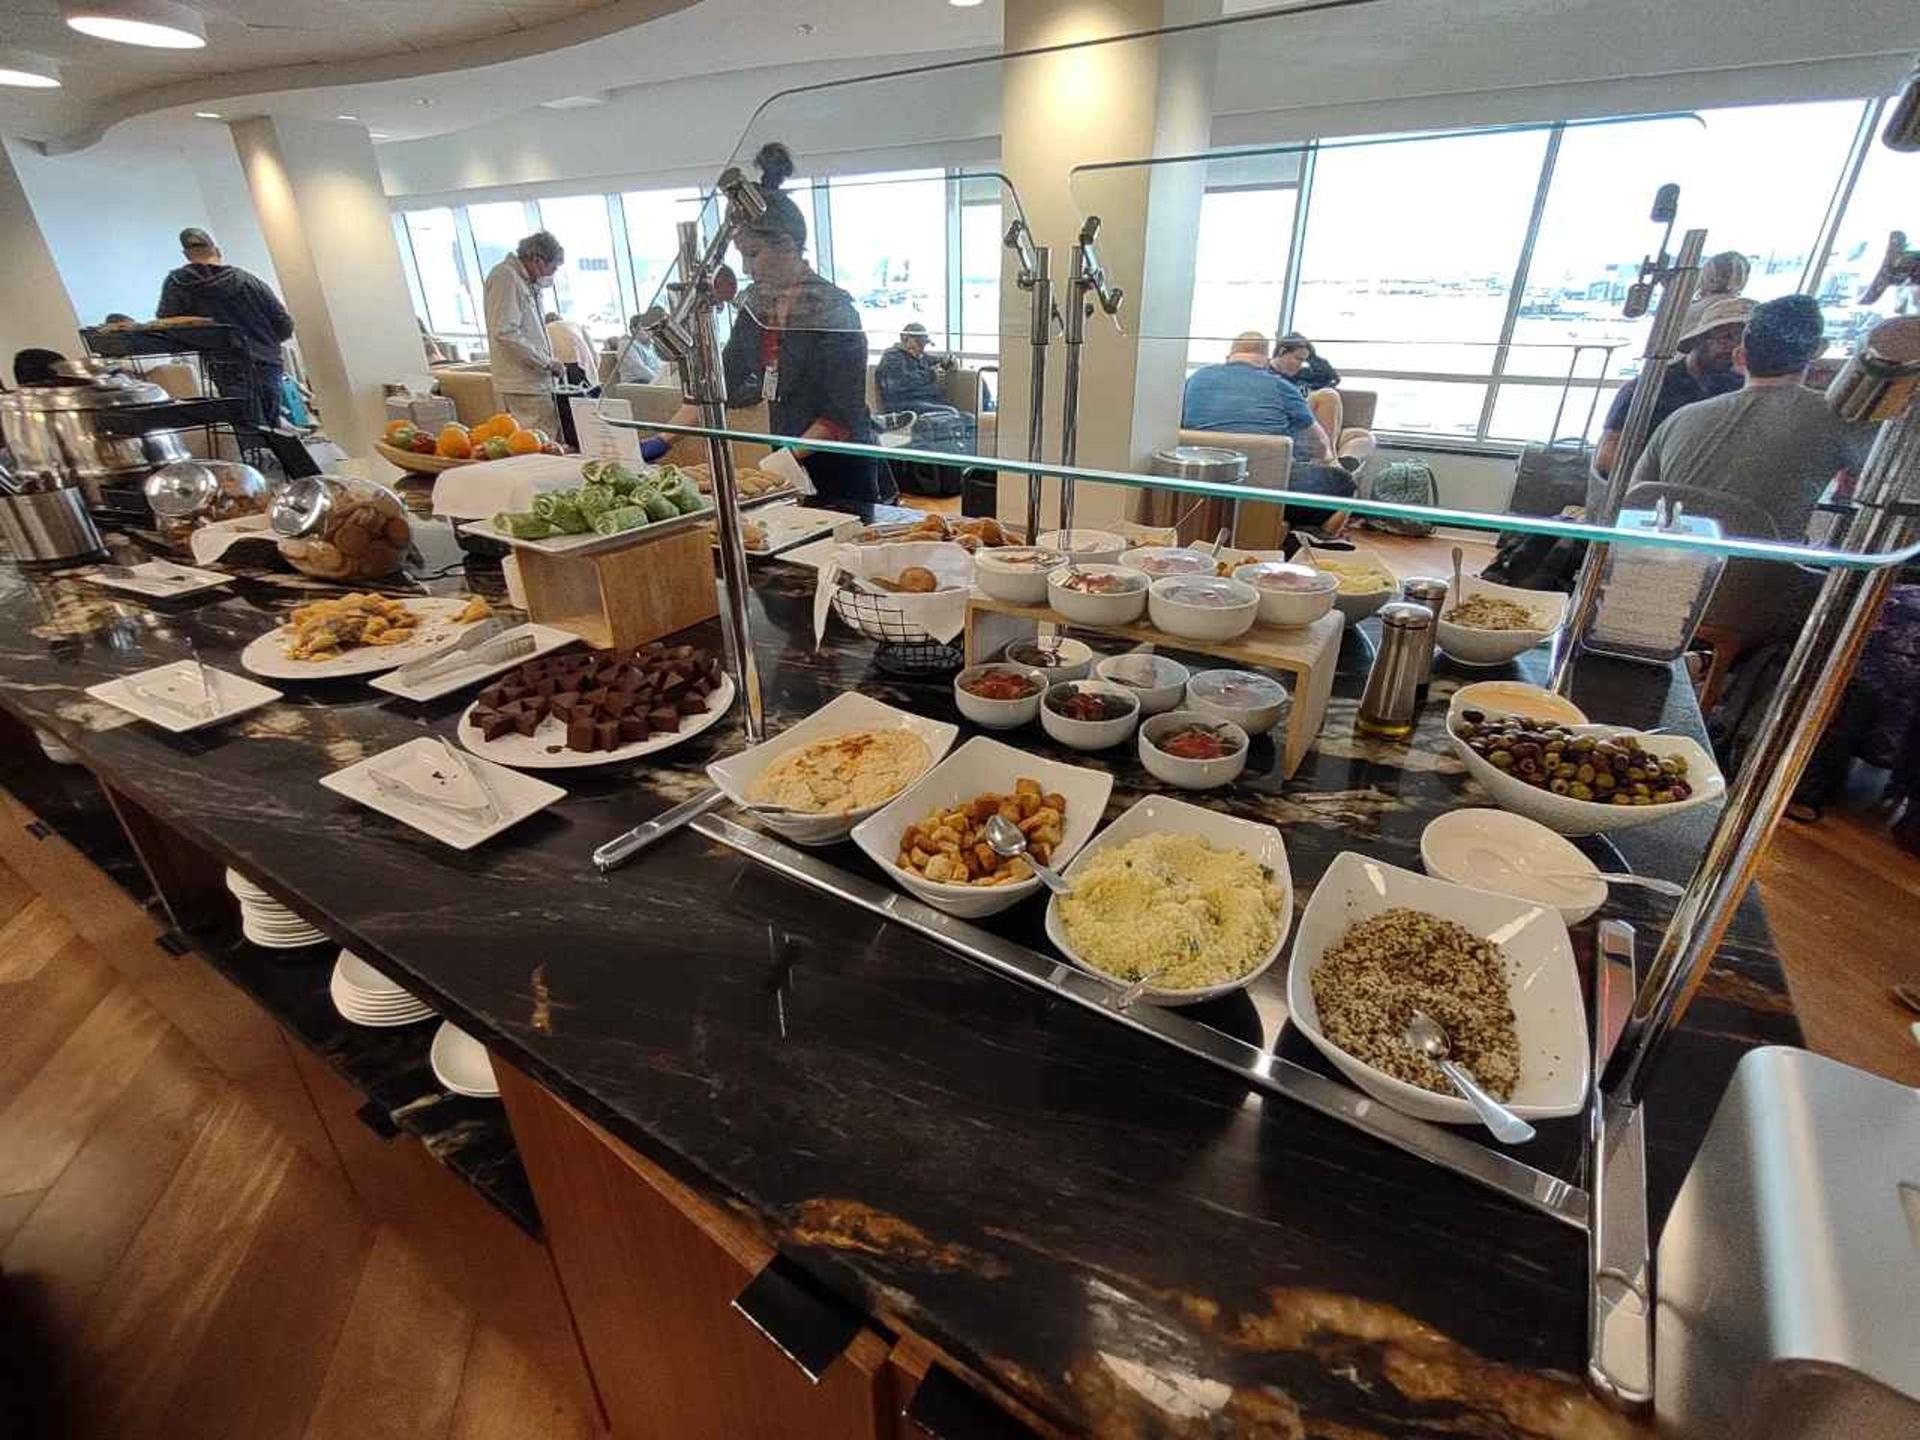 Turkish Airlines Lounge Miami image 6 of 7